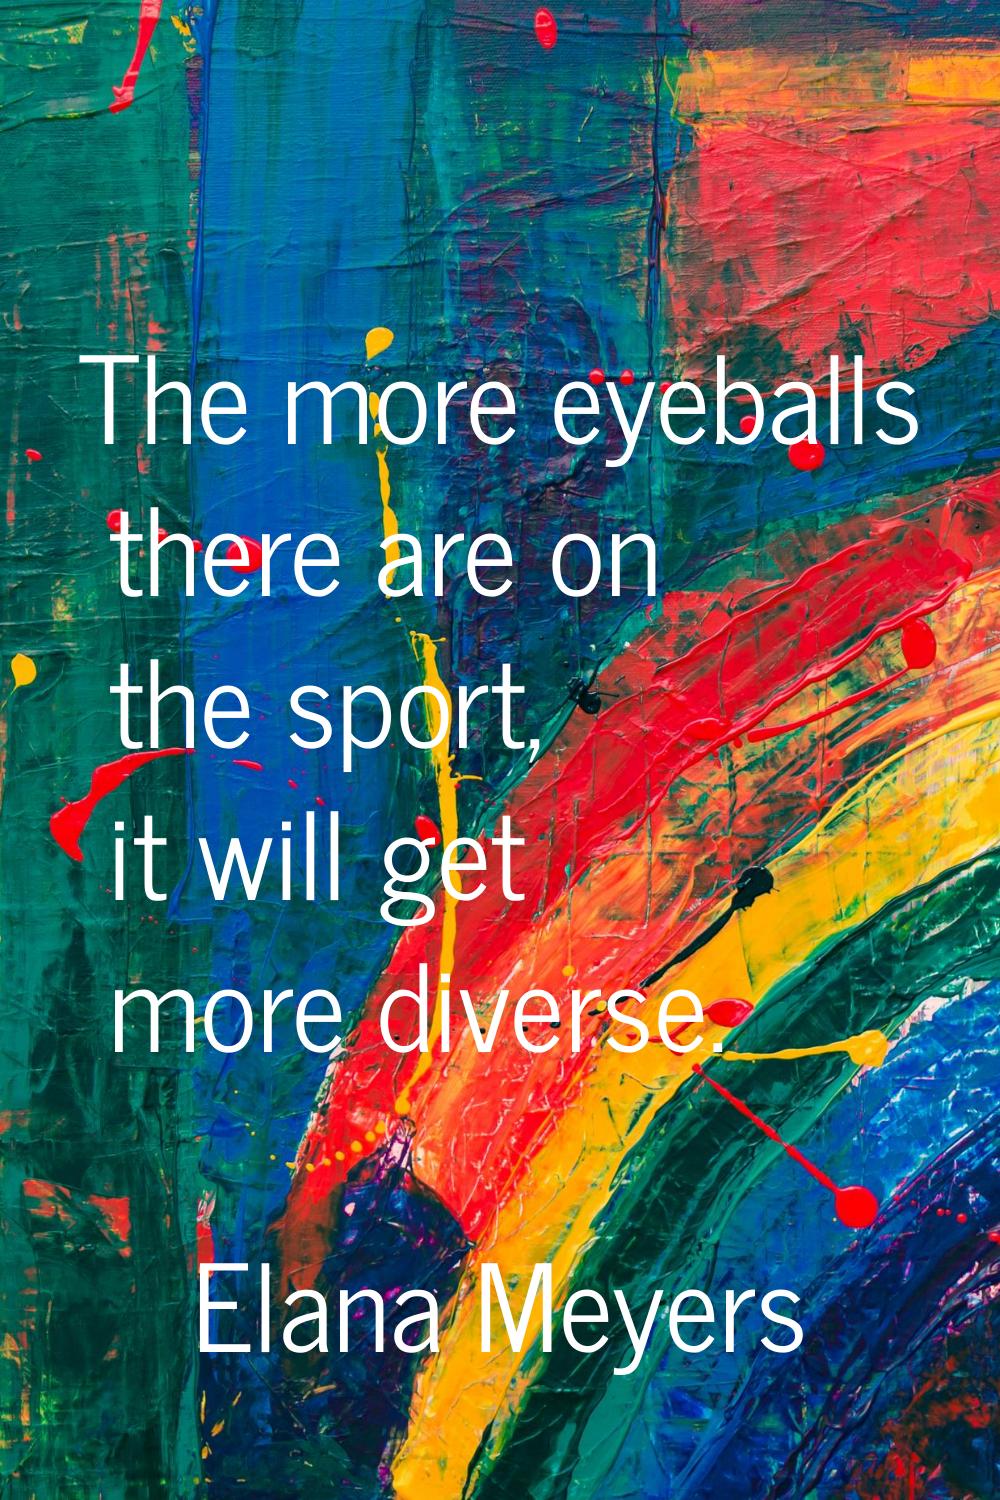 The more eyeballs there are on the sport, it will get more diverse.